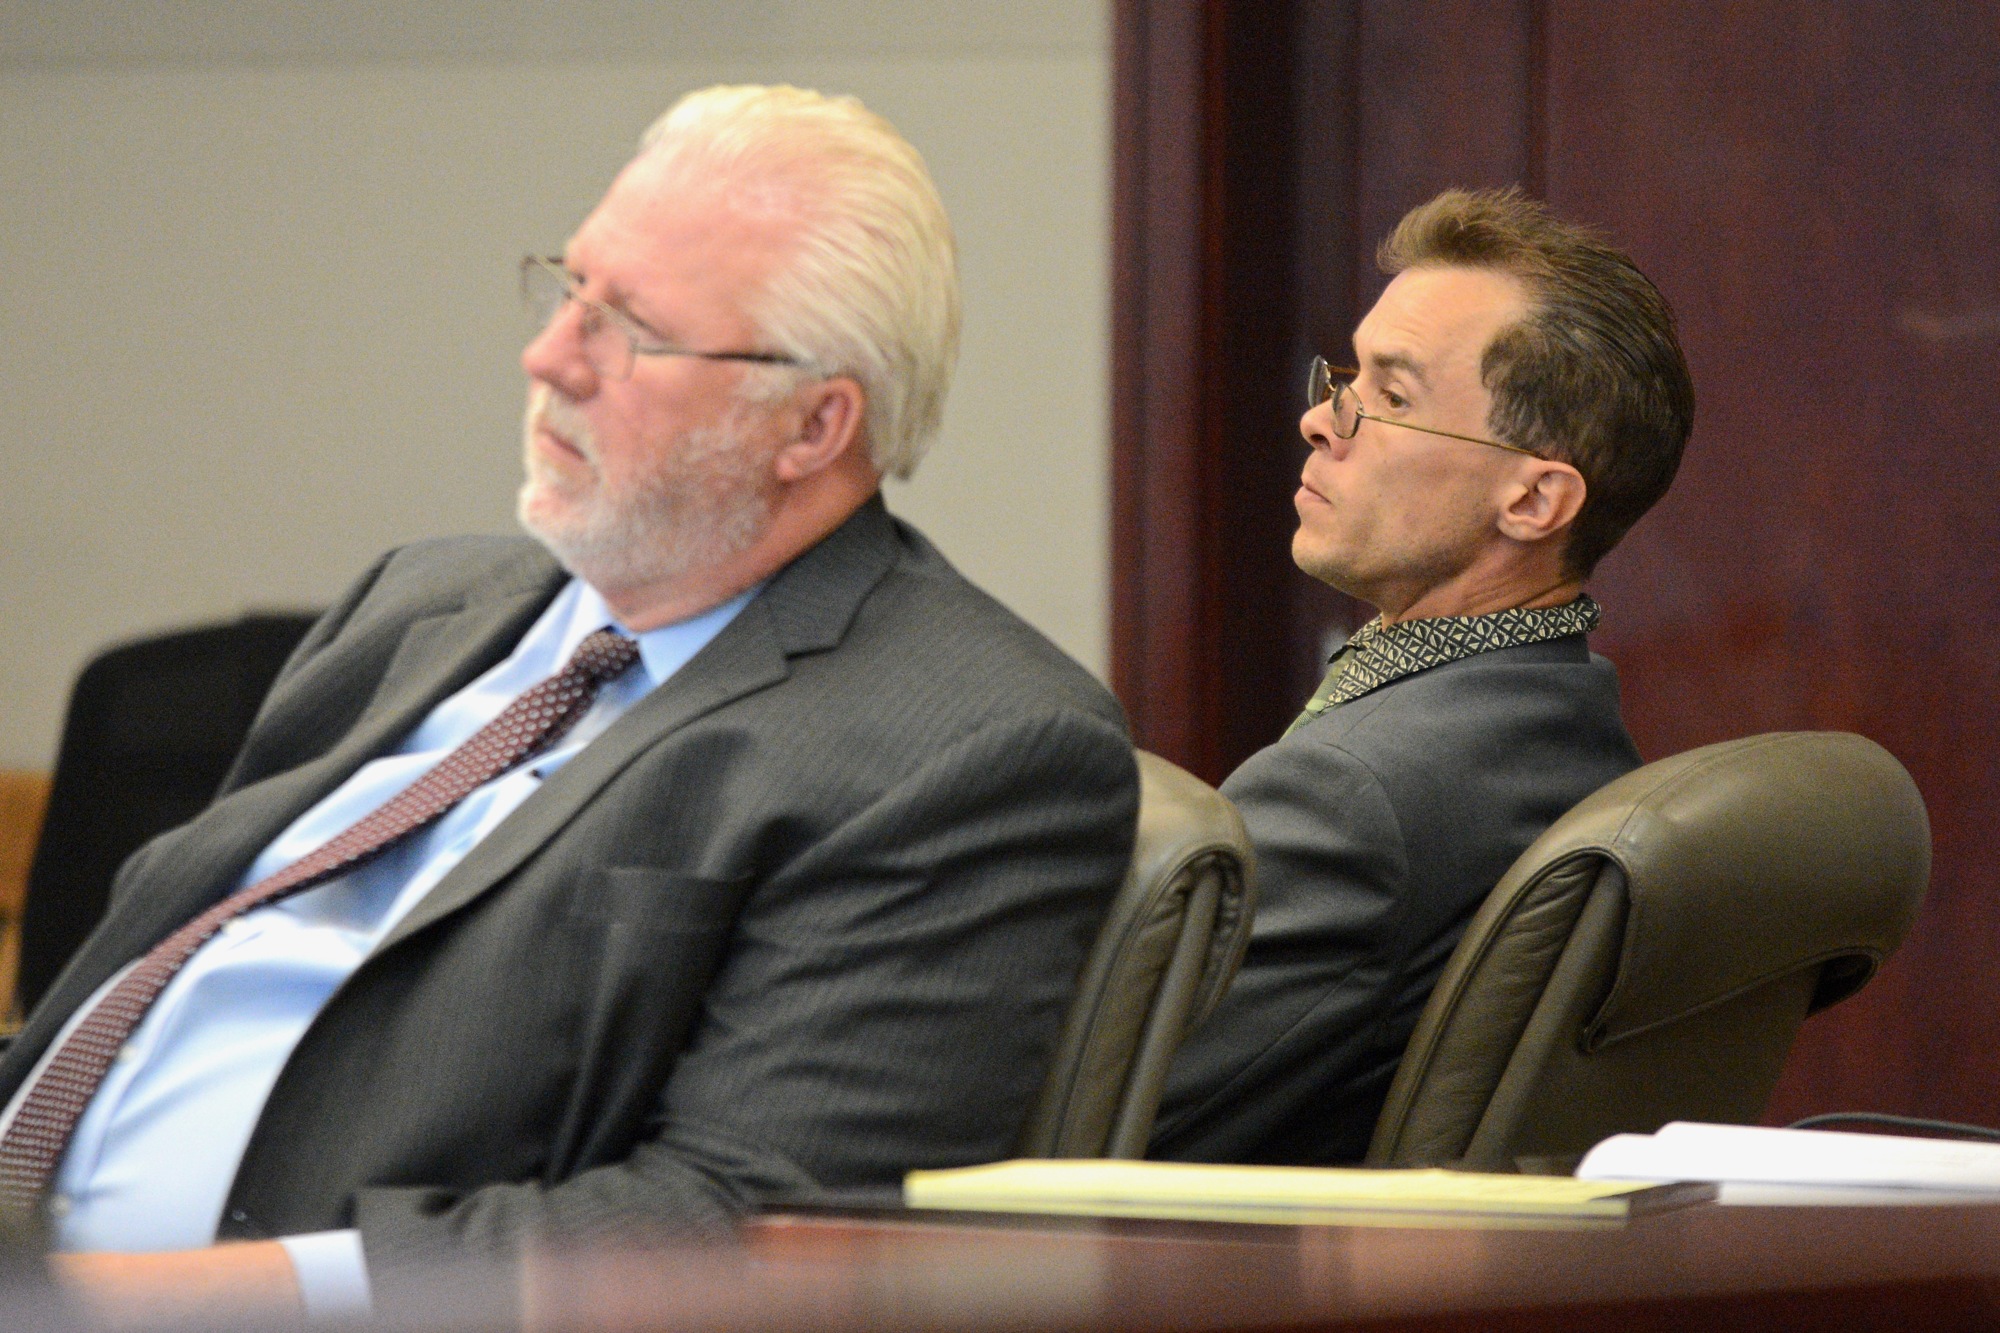 Jonathan Canales, right, in court Oct. 19 with attorney Garry Wood. (Photo by Jonathan Simmons)